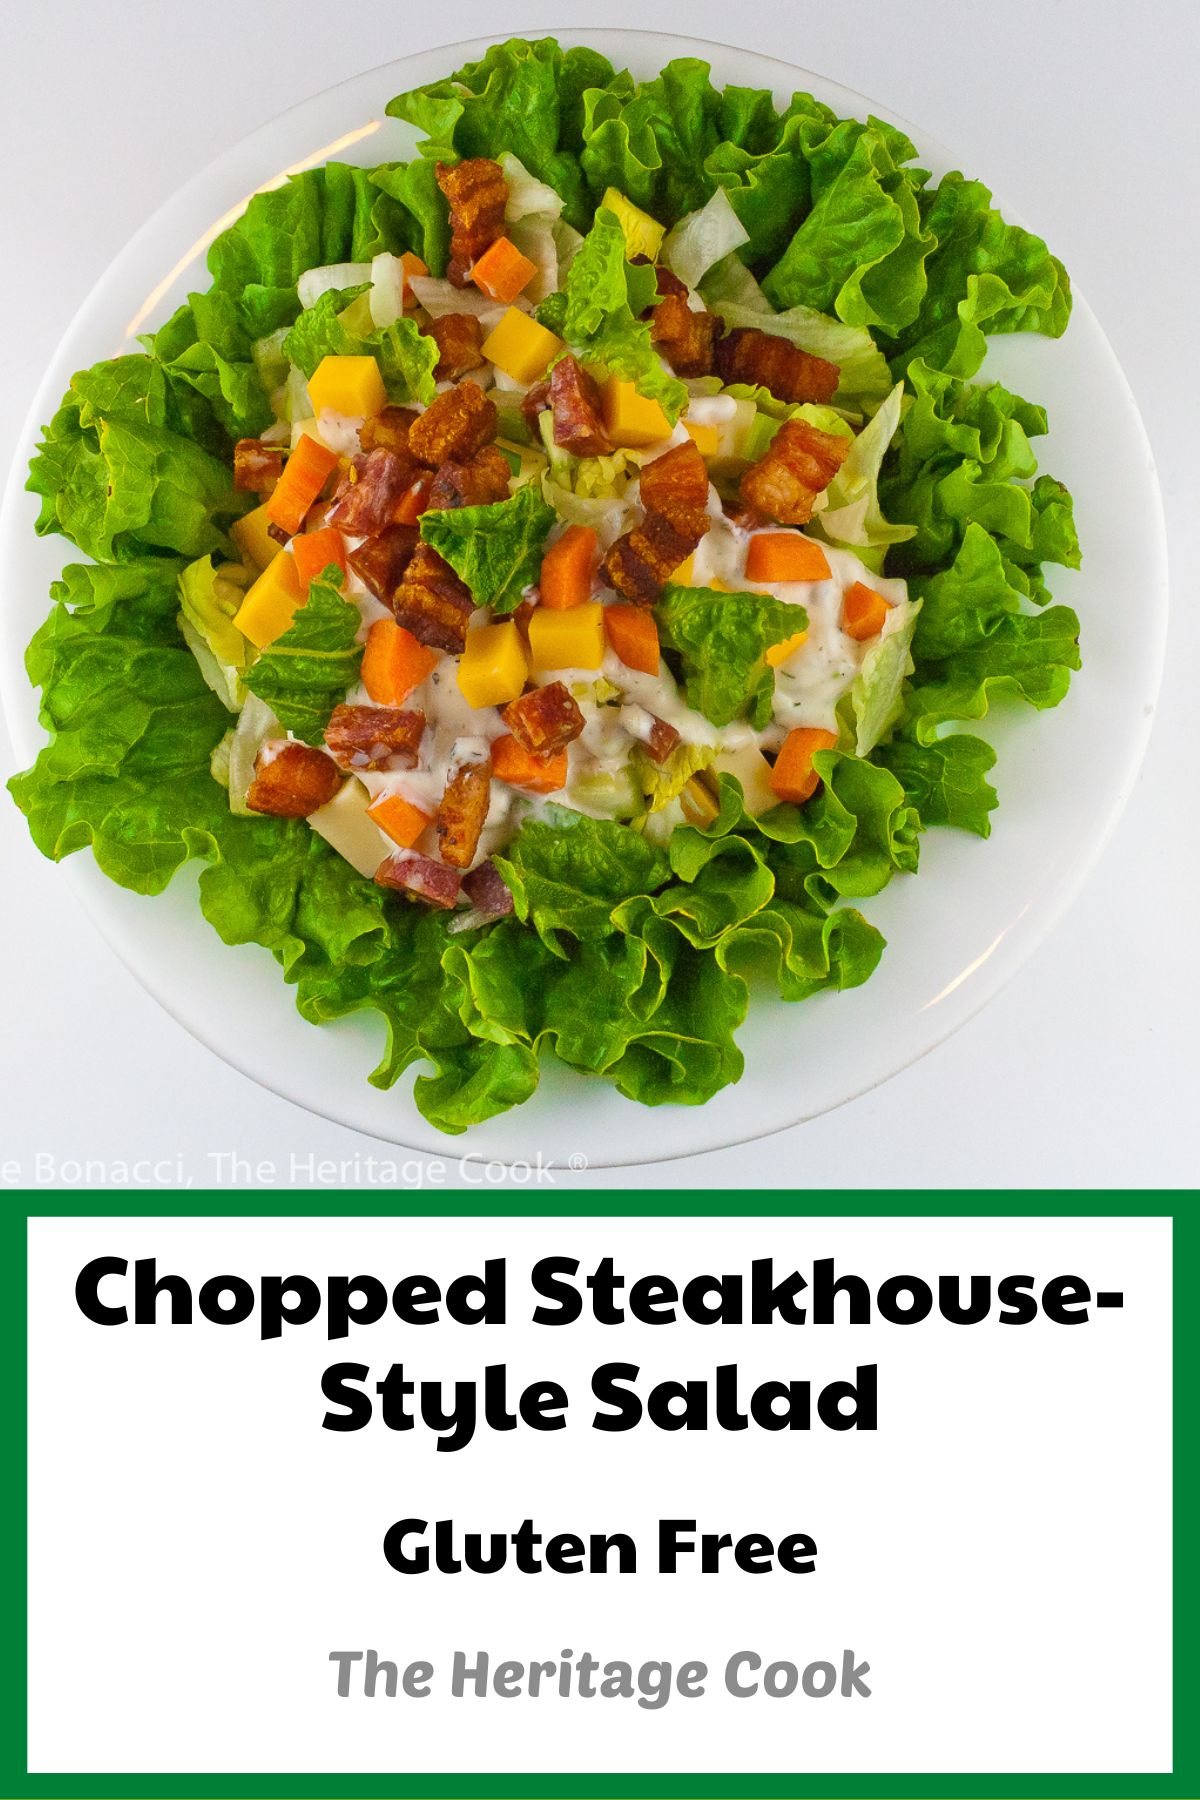 Chopped Steakhouse Style Salad with Ranch-Style Dressing (Gluten Free) © 2022 Jane Bonacci, The Heritage Cook